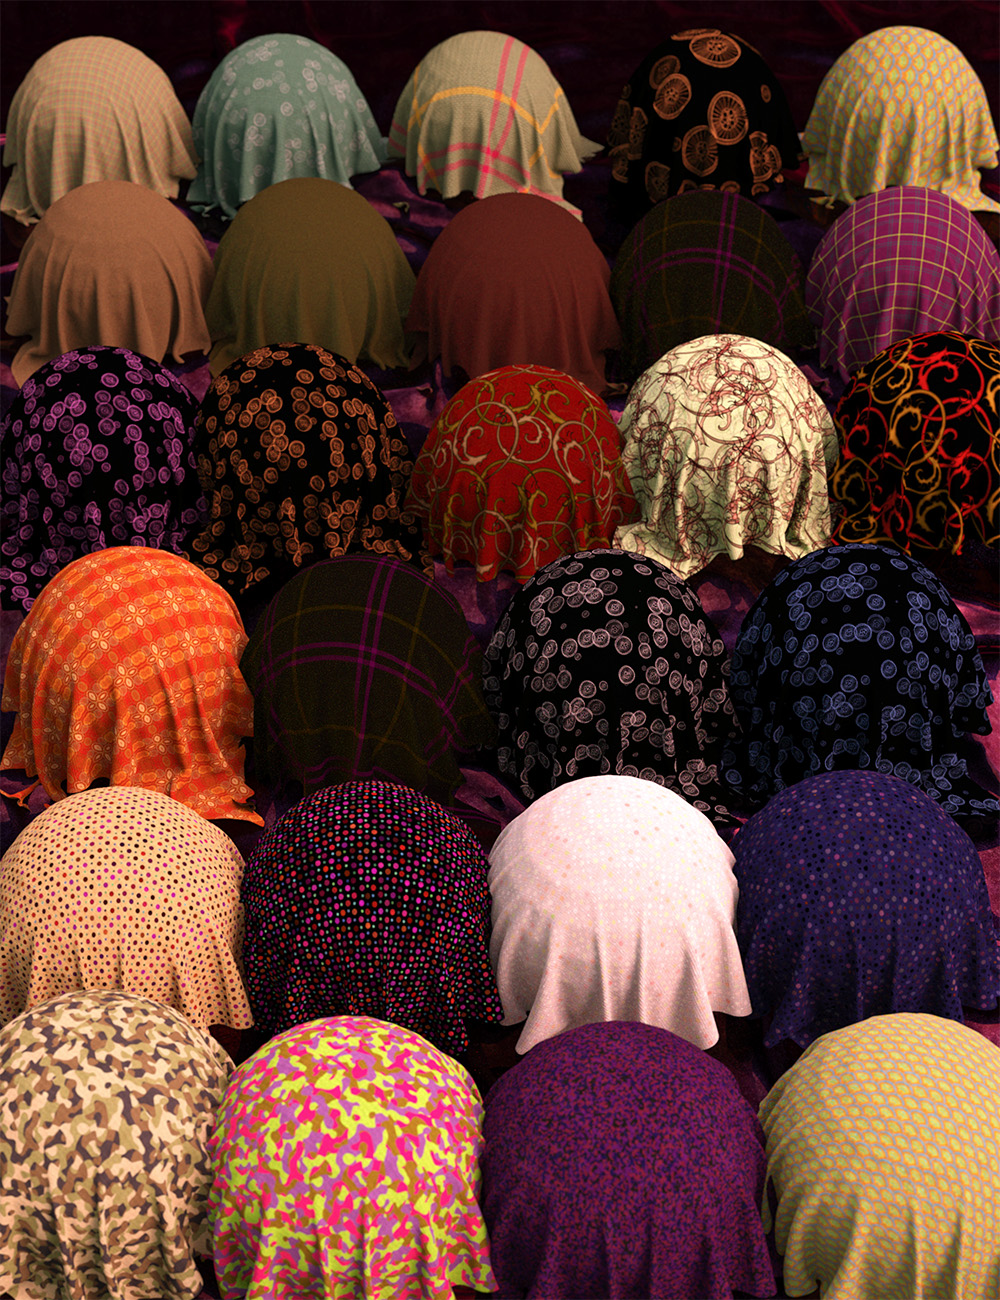 Wonderful Weaves - Eclectic Woven Fabric Shaders by: MartinJFrost, 3D Models by Daz 3D